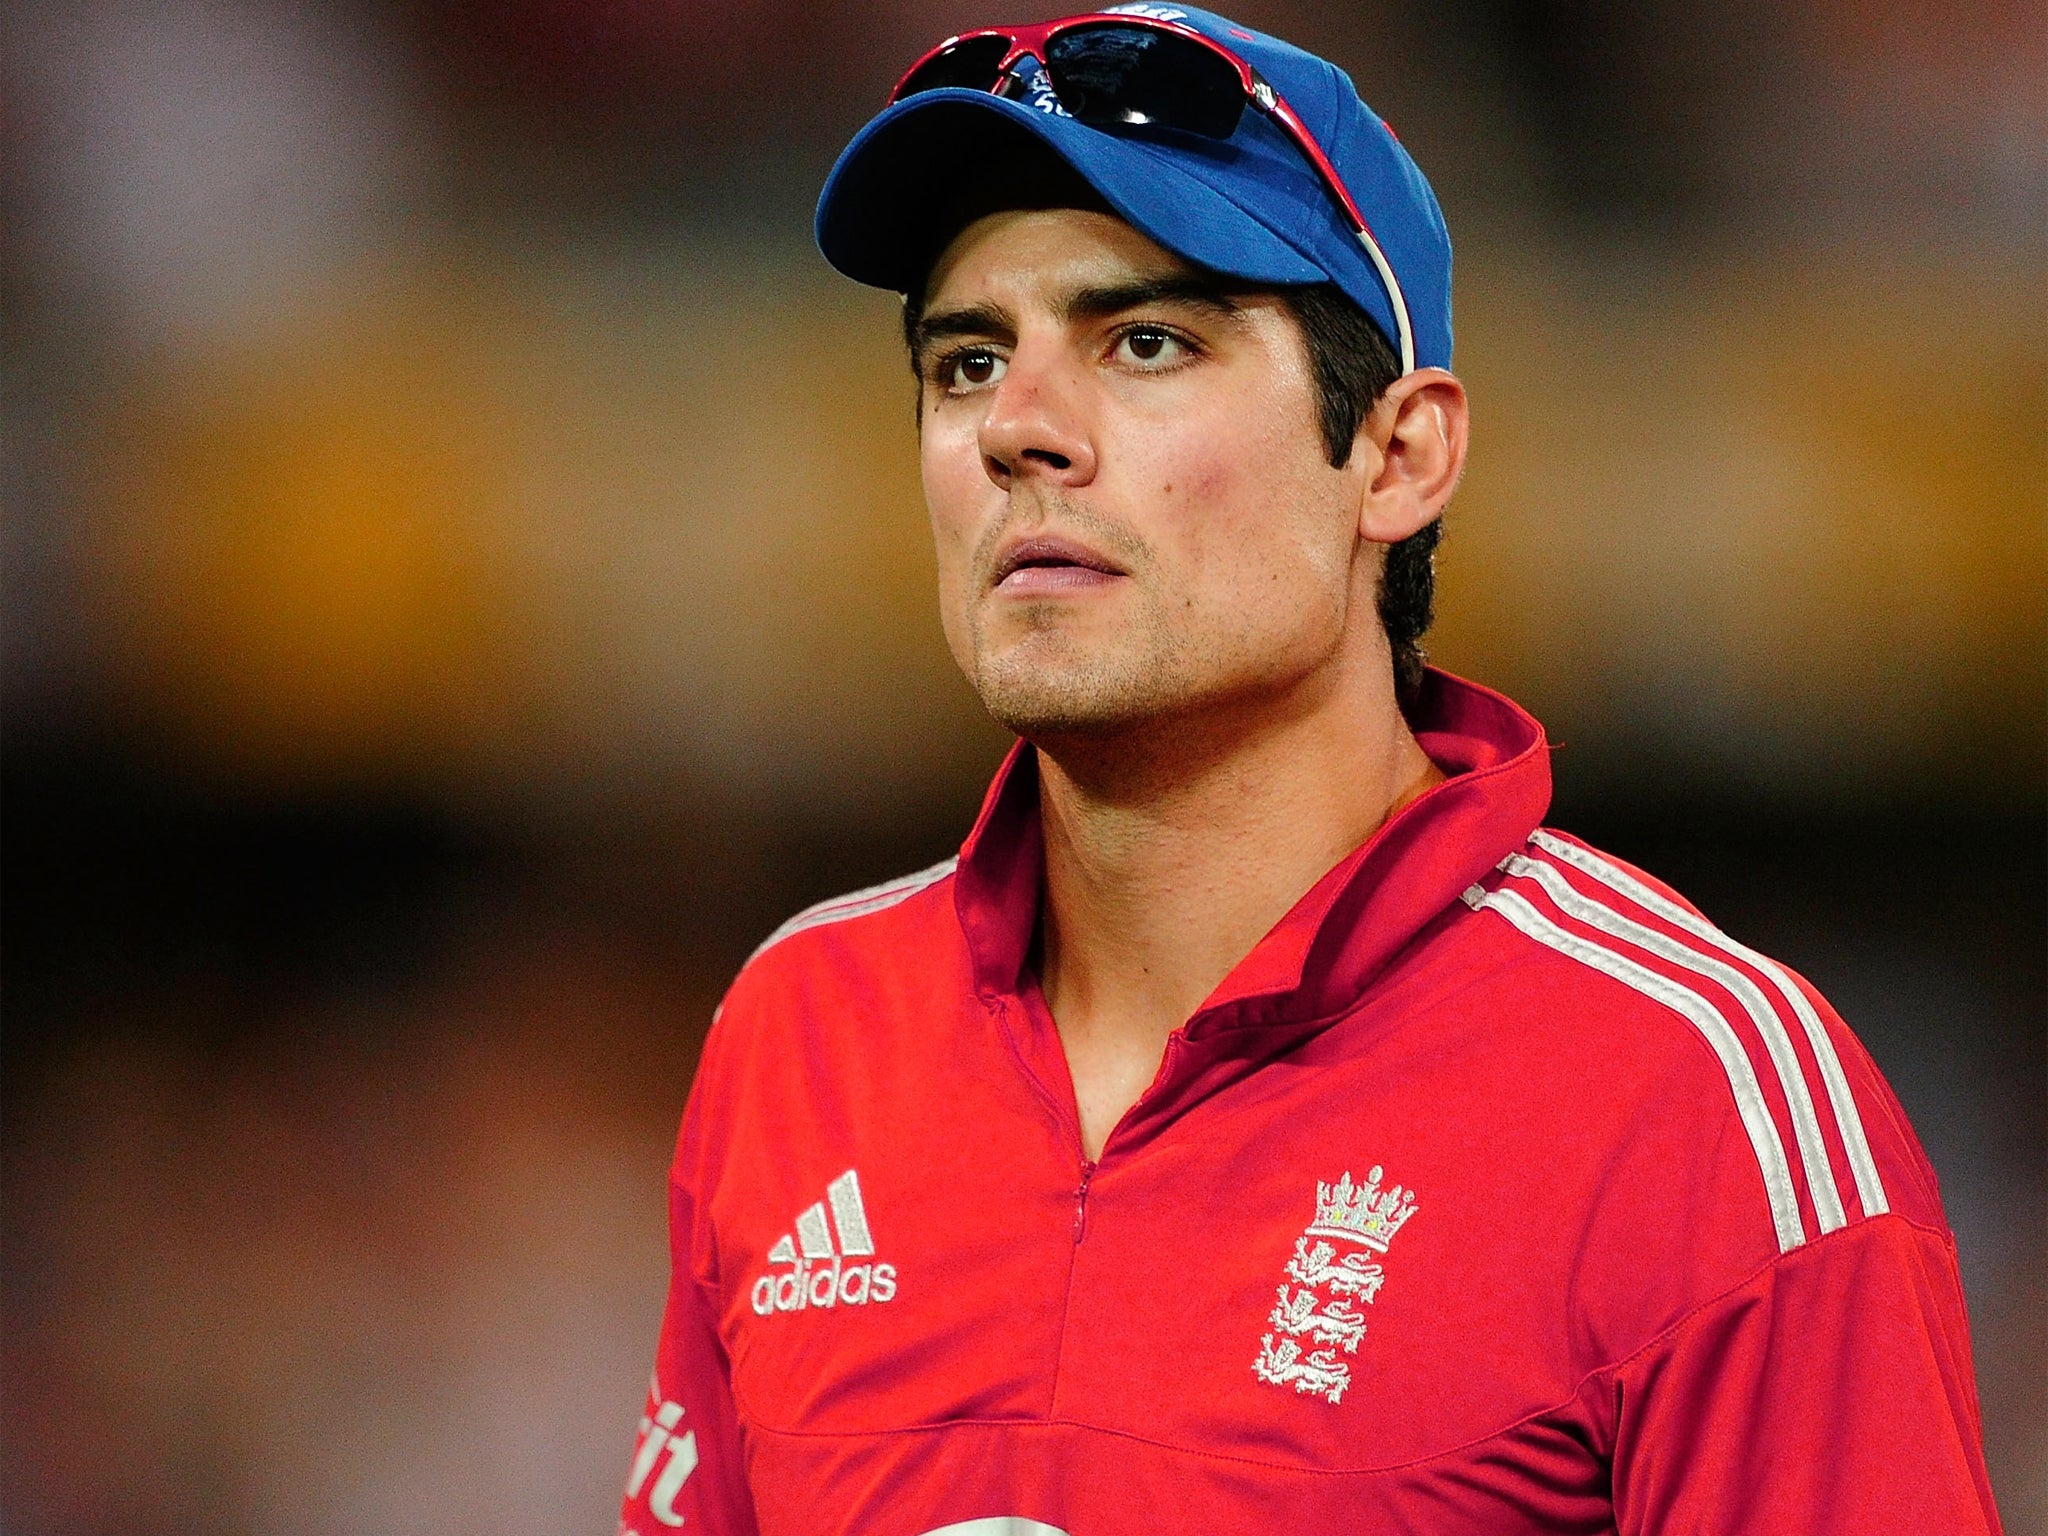 Alastair Cook will not play in the fourth ODI